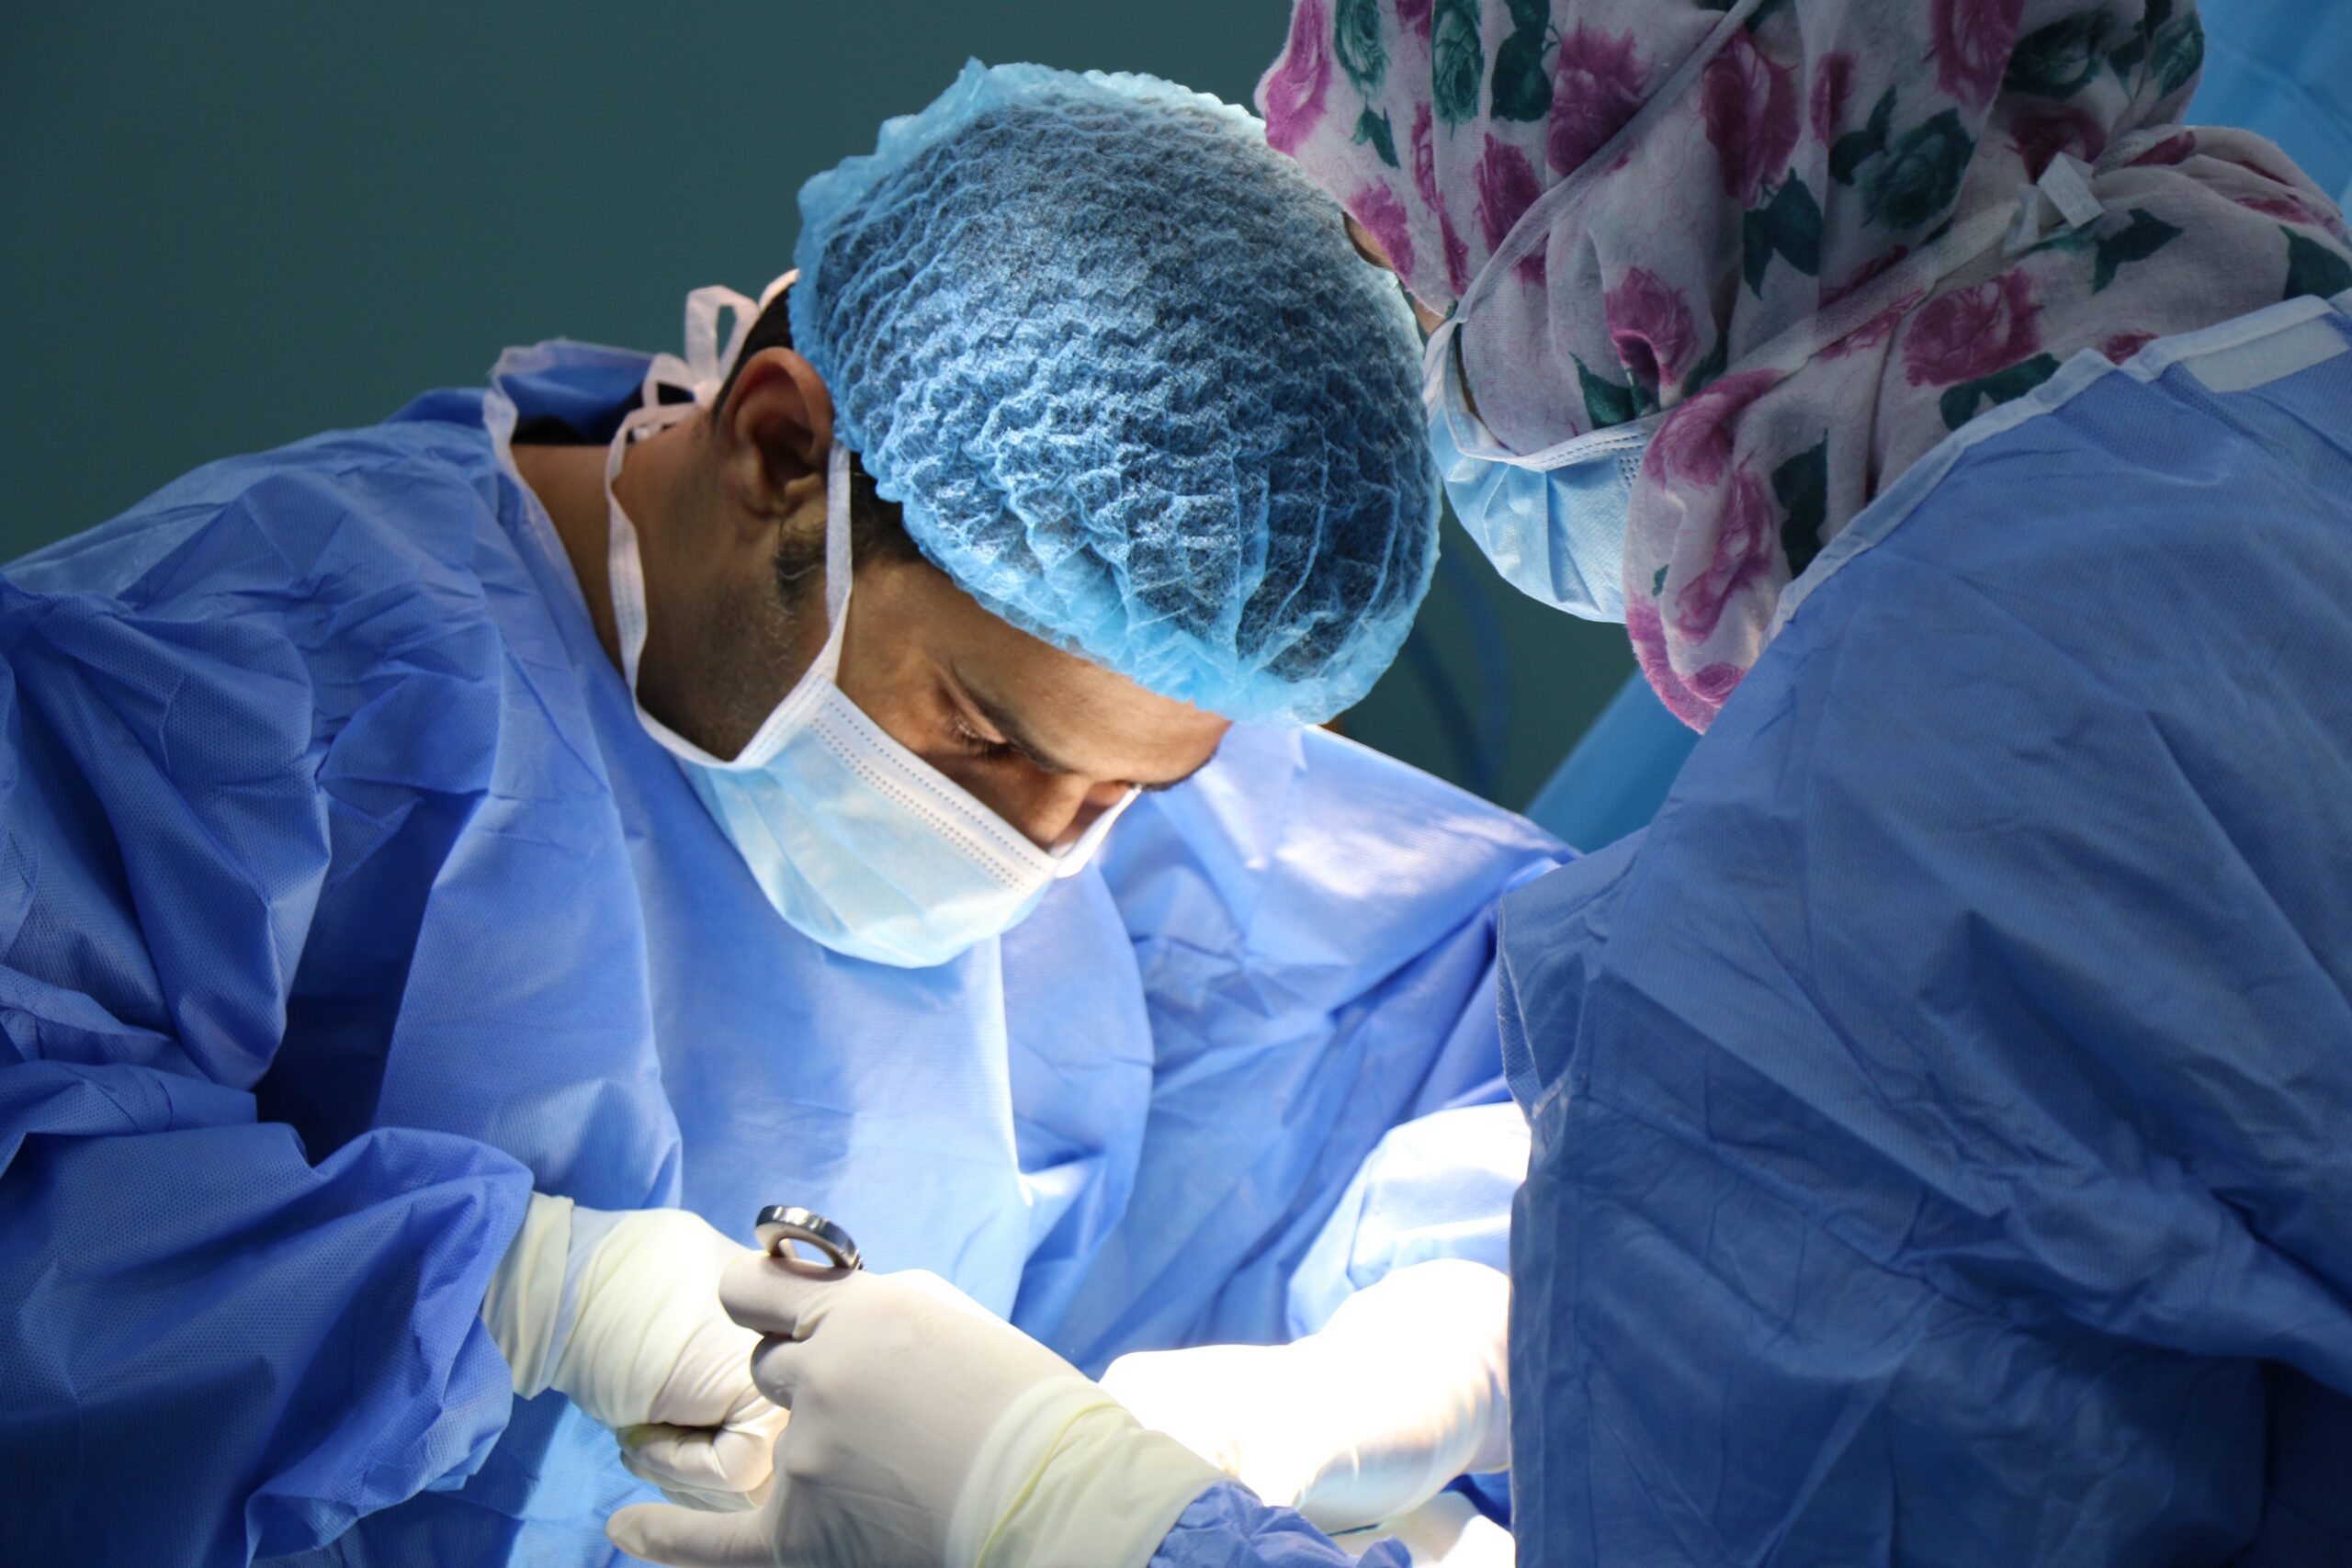 "First successful lung transplant surgery in Eastern India"